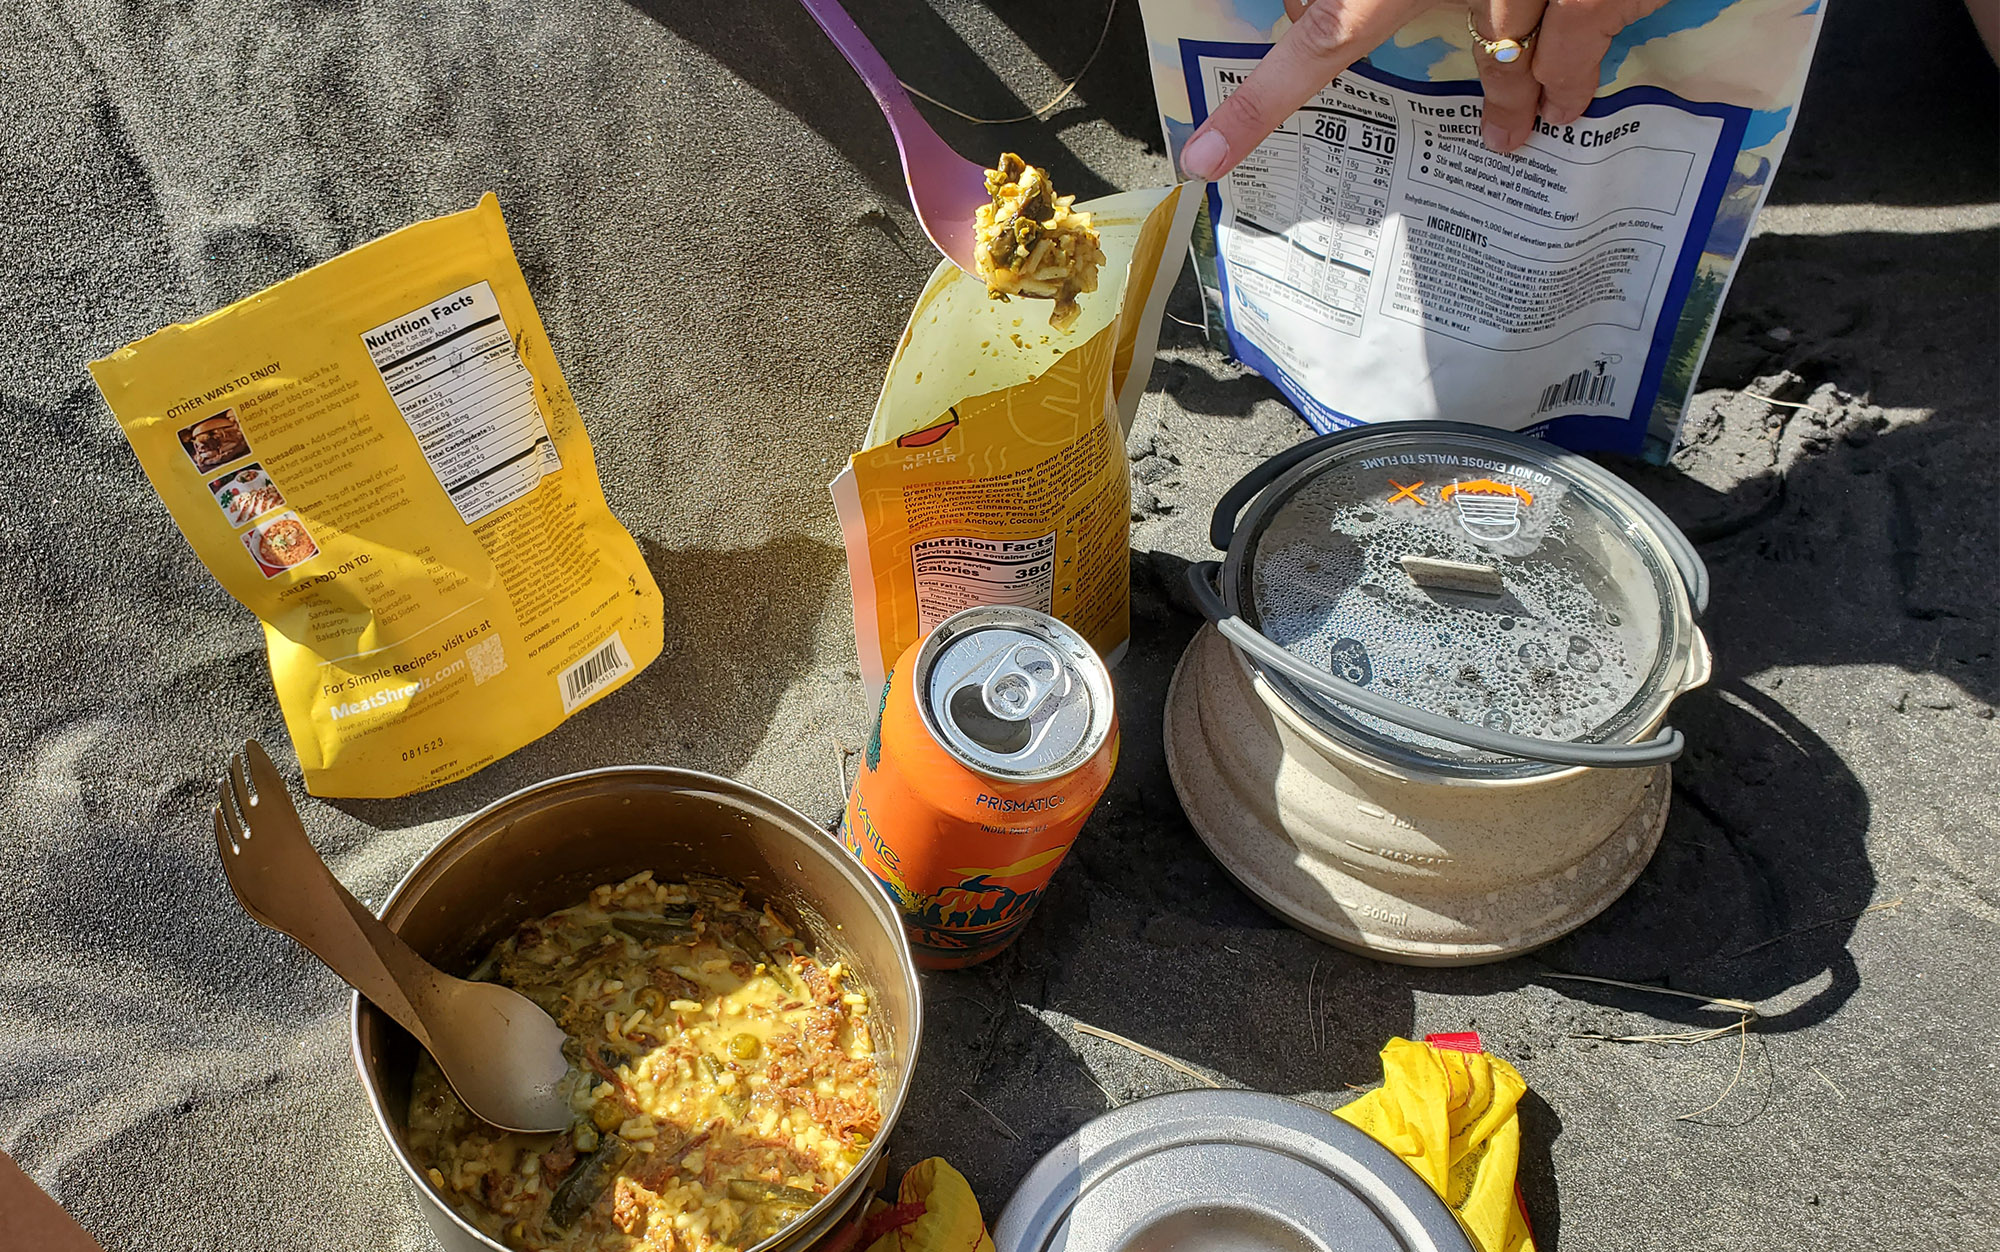 The author and Jac eat a smorgasbord of backpacking food for lunch.